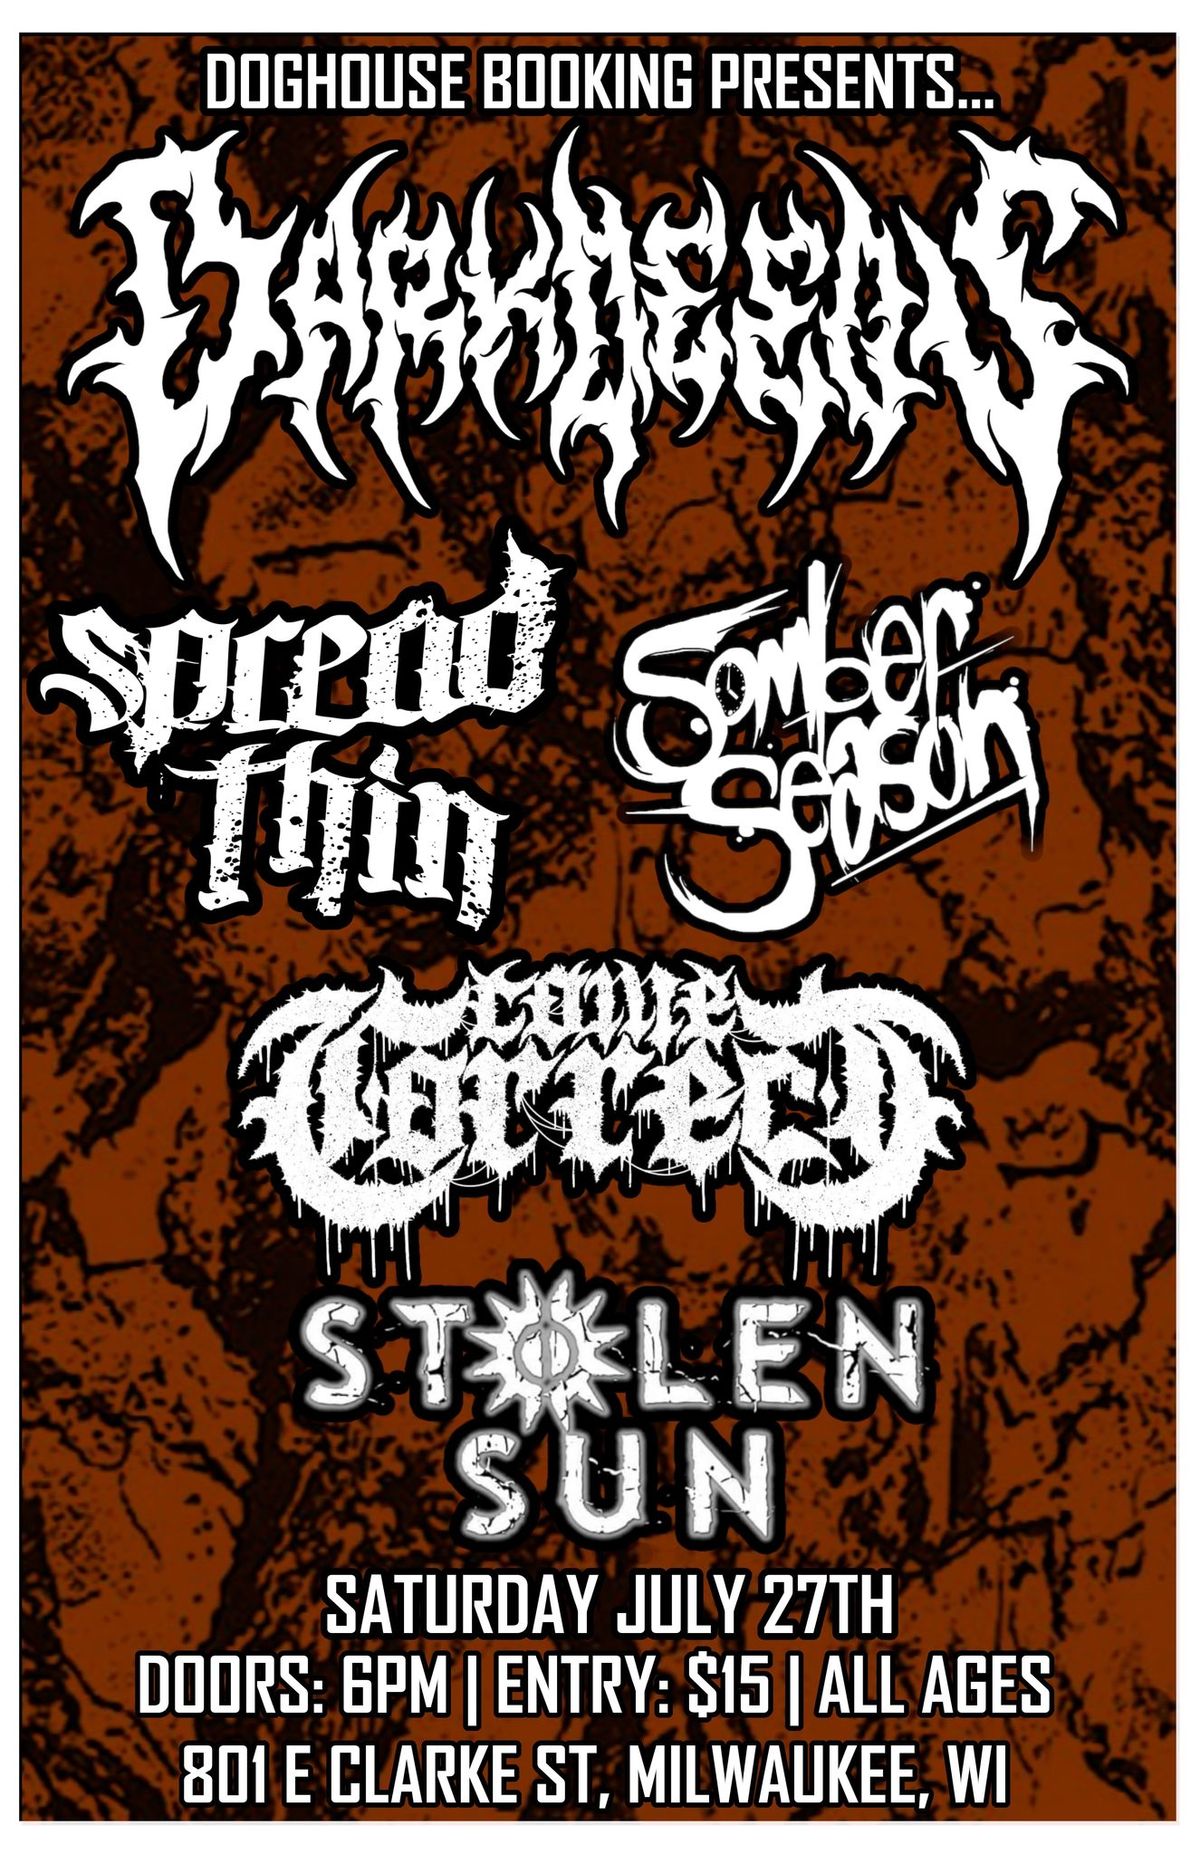 A NIGHT OF HEAVY MUSIC AT FALCON BOWL